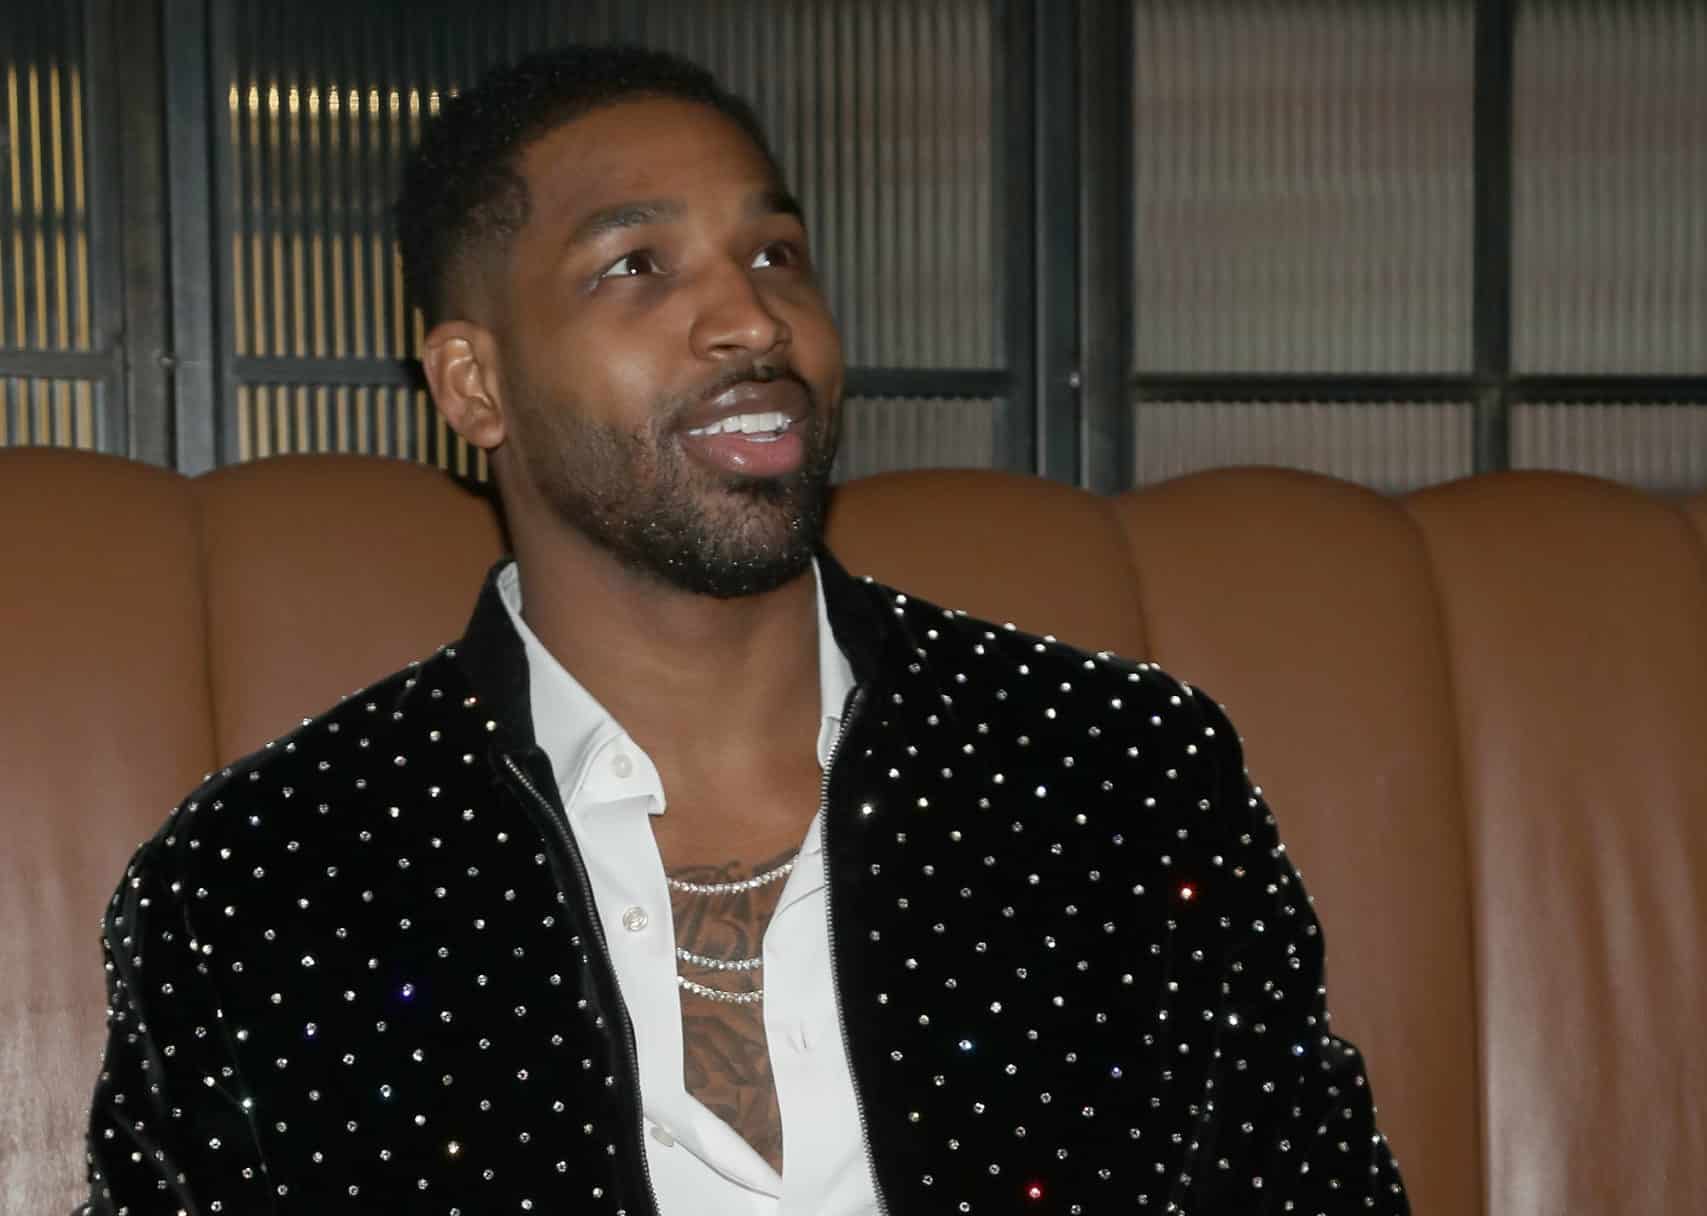 Tristan Thompson Allegedly Sent Threatening Text Messages To The Woman